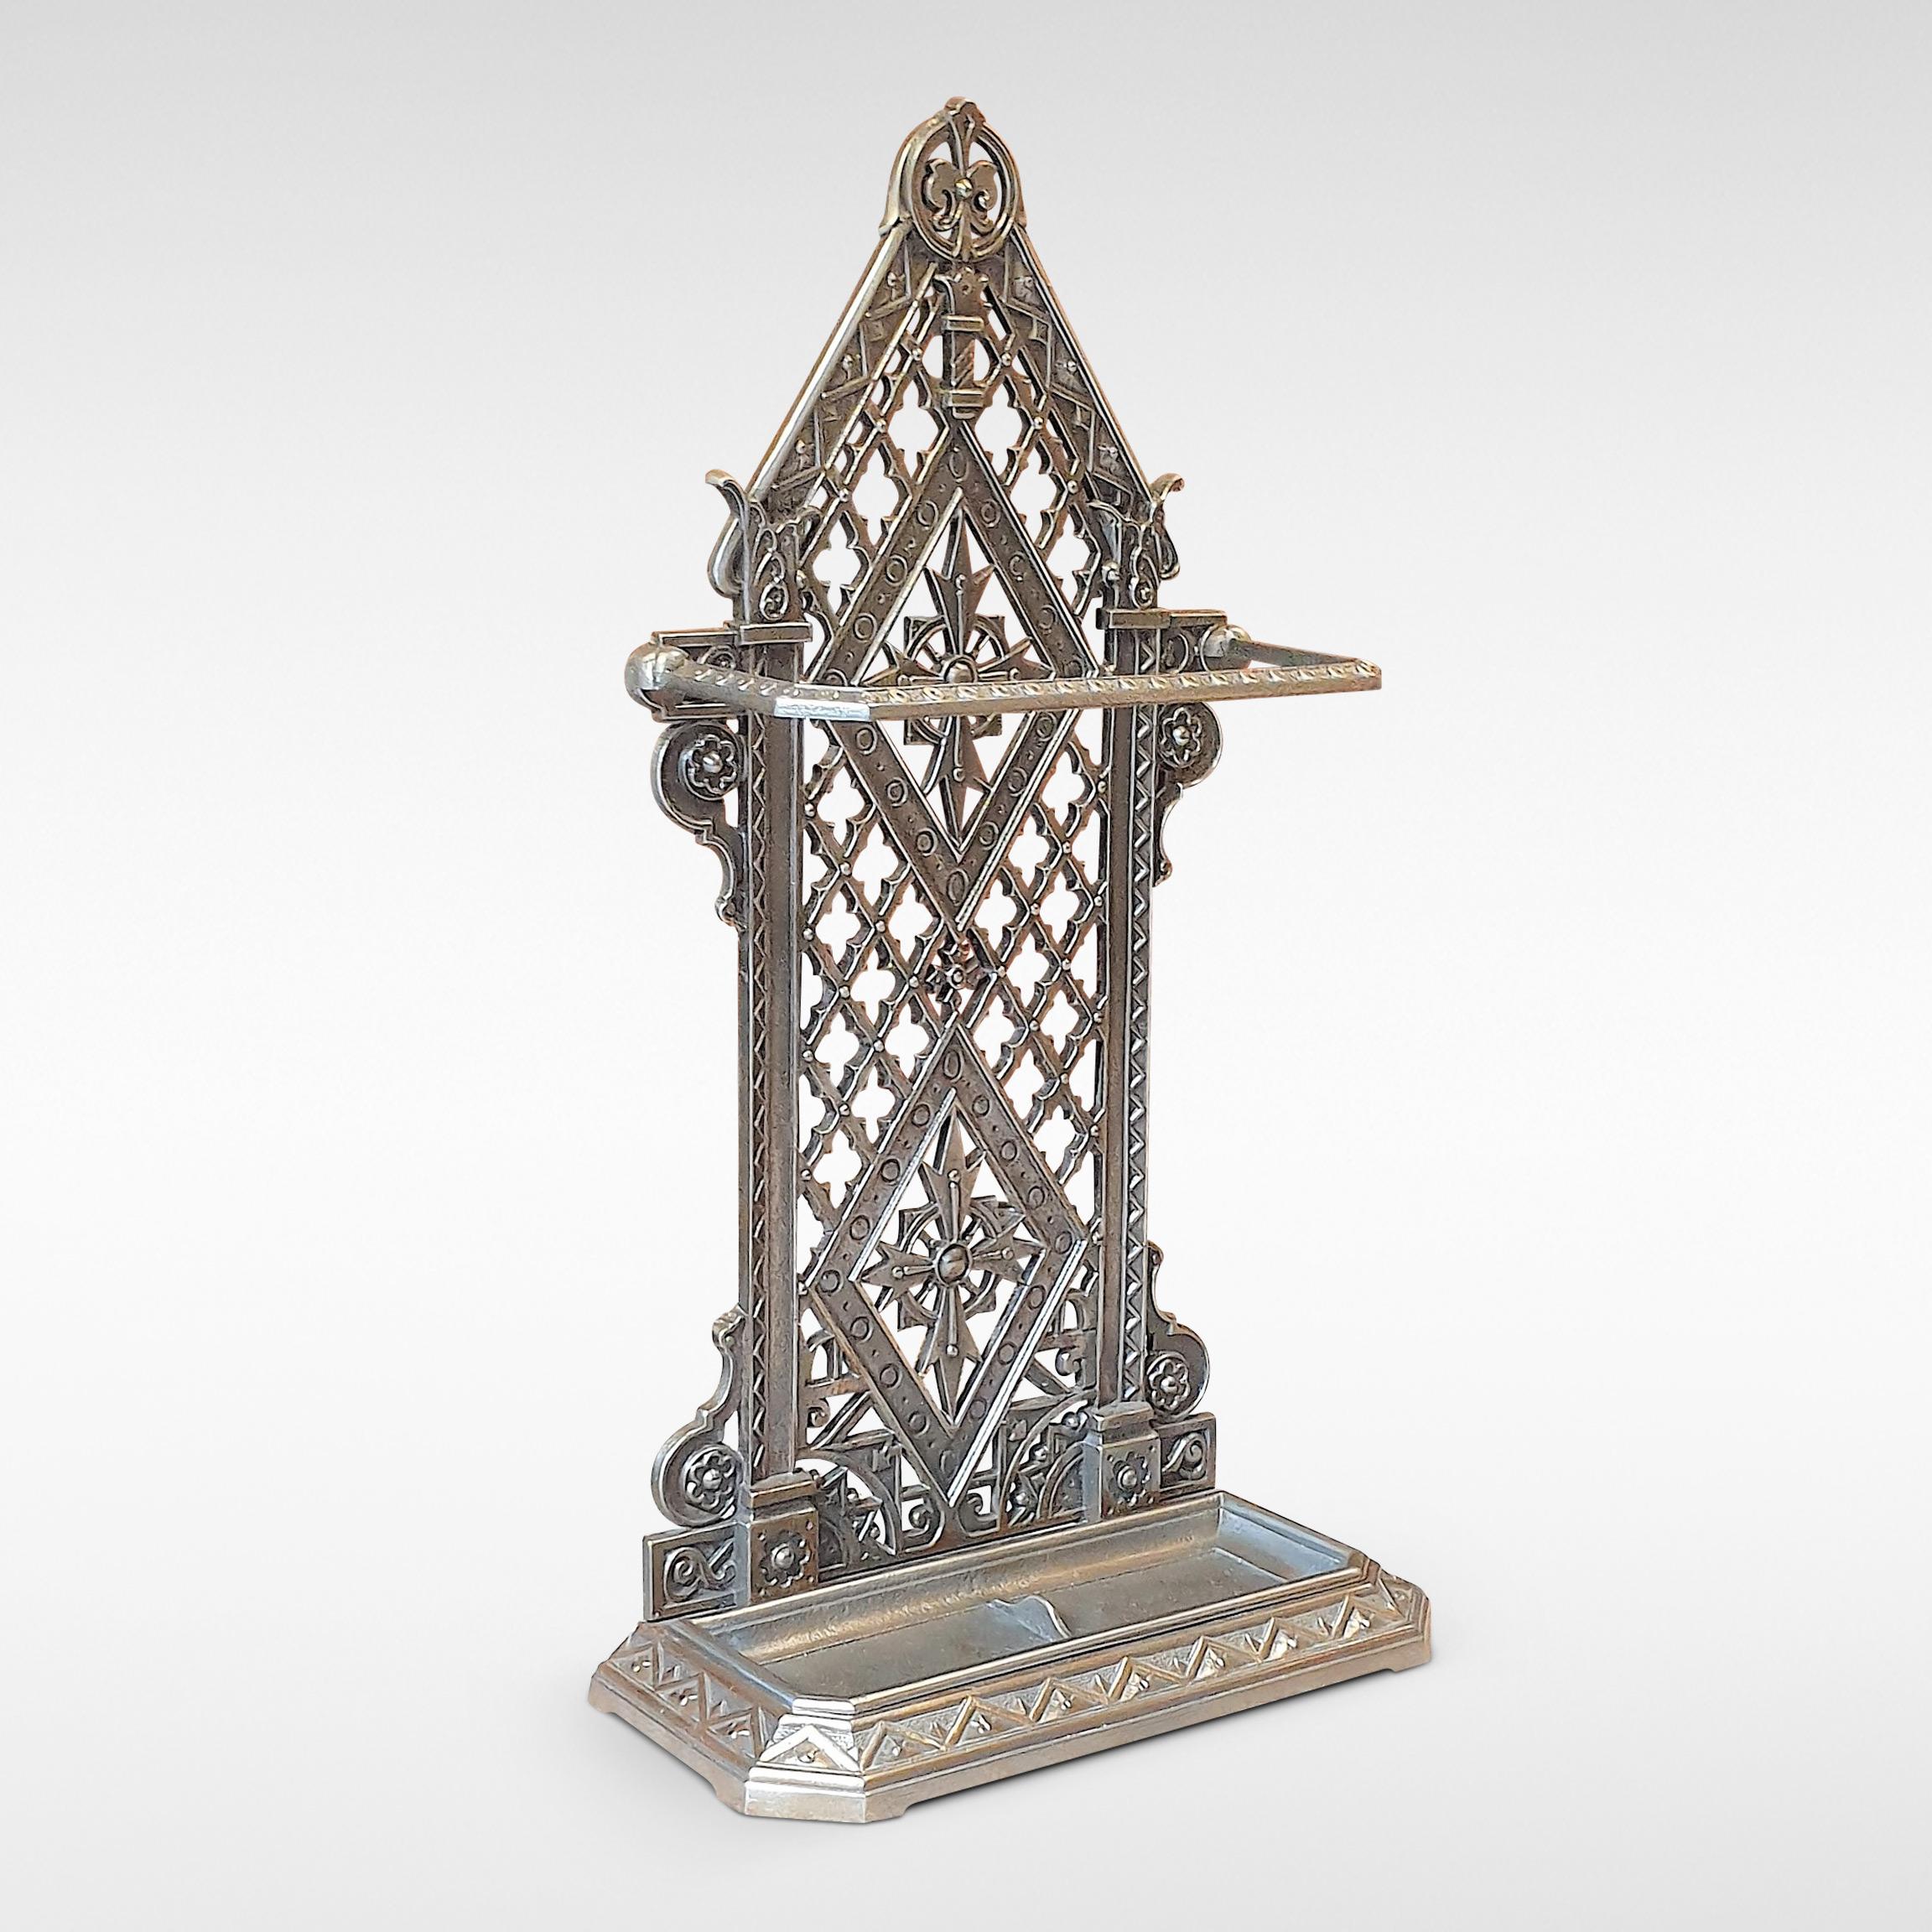 Gothic revival cast iron stick stand marked Falkirk, circa 1880s